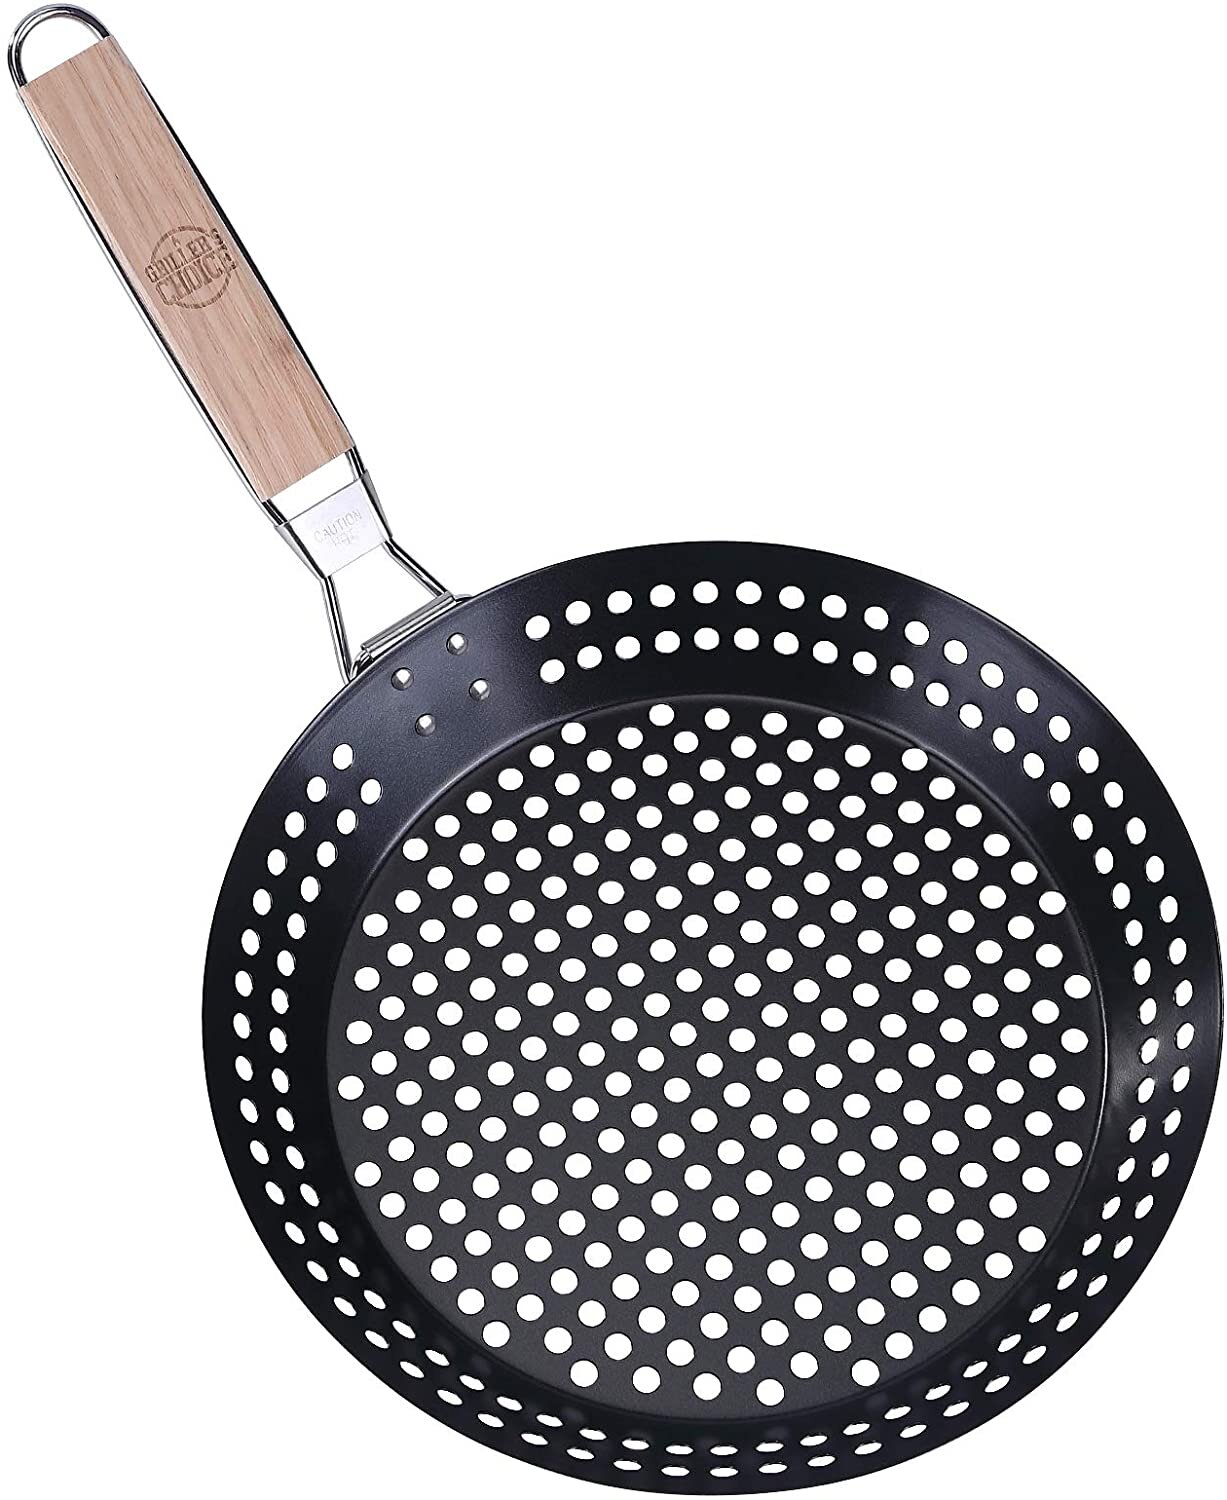 Blue Rhino Steel Non-stick Grill Pan in the Grill Cookware department at